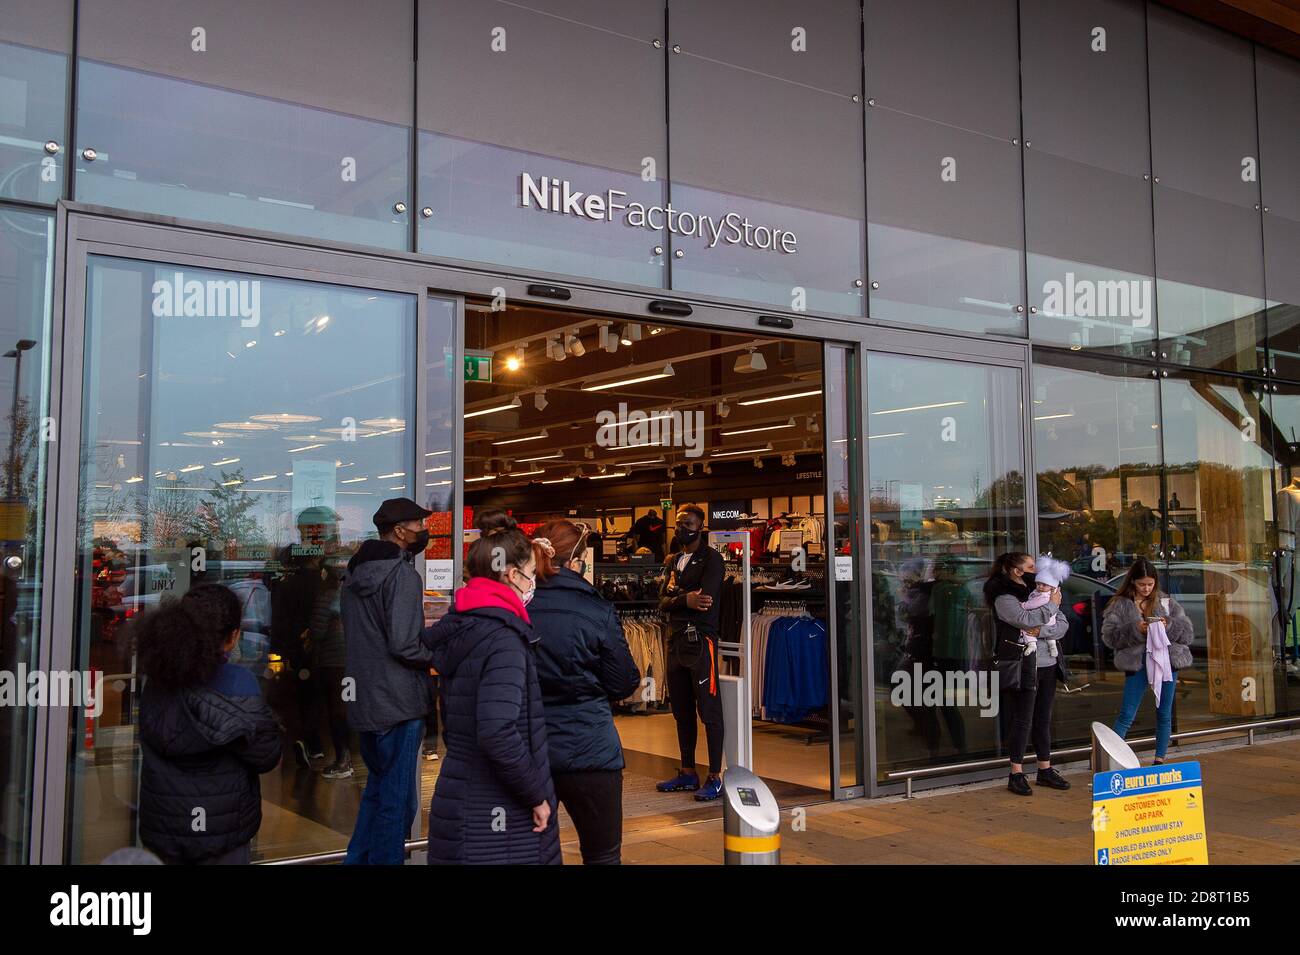 Nike Factory High Resolution Stock Photography and Images - Alamy